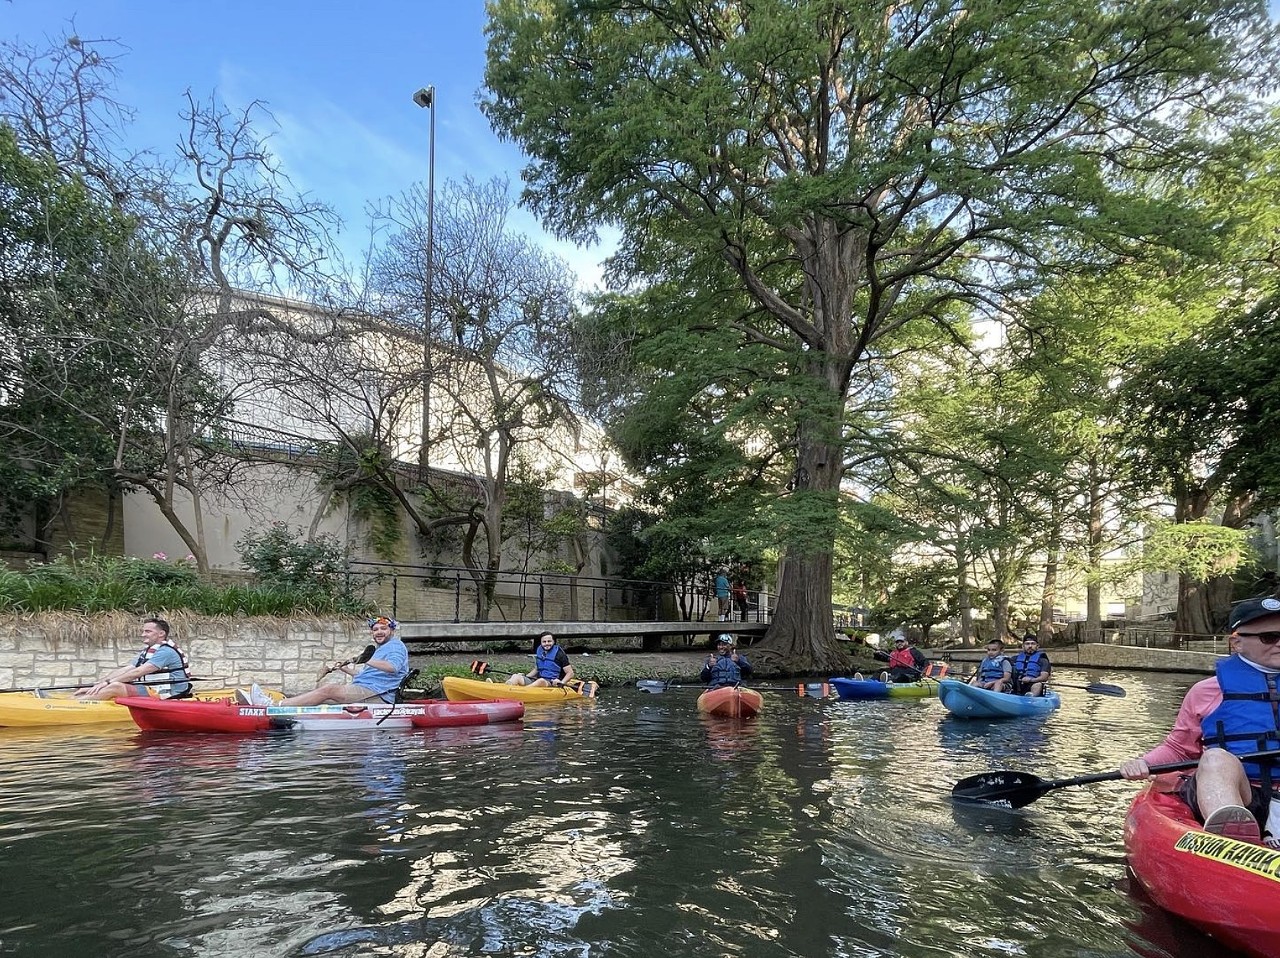 Kayak the San Antonio River
Looking for some water-centric entertainment? You can paddle down scenic stretches of the river downtown — both through the River Walk and the King William District. Mission Kayak provides guided and unguided kayak rentals from March through October, or you can take your own kayak to paddle select parts of the river!